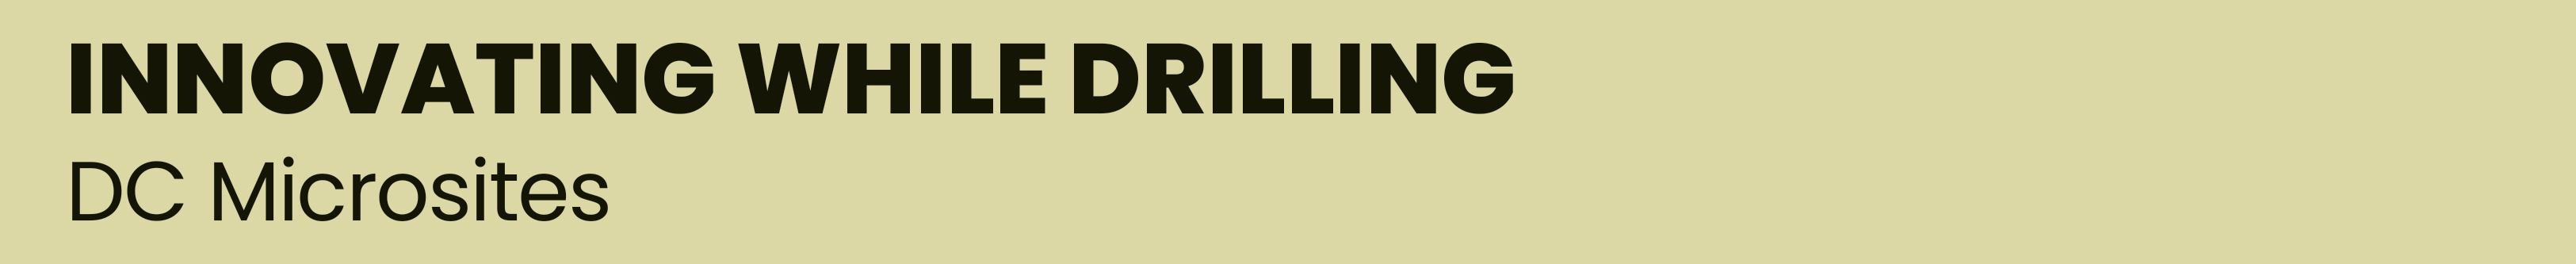 DrillingContractor.org Microsite: Innovating While Drilling